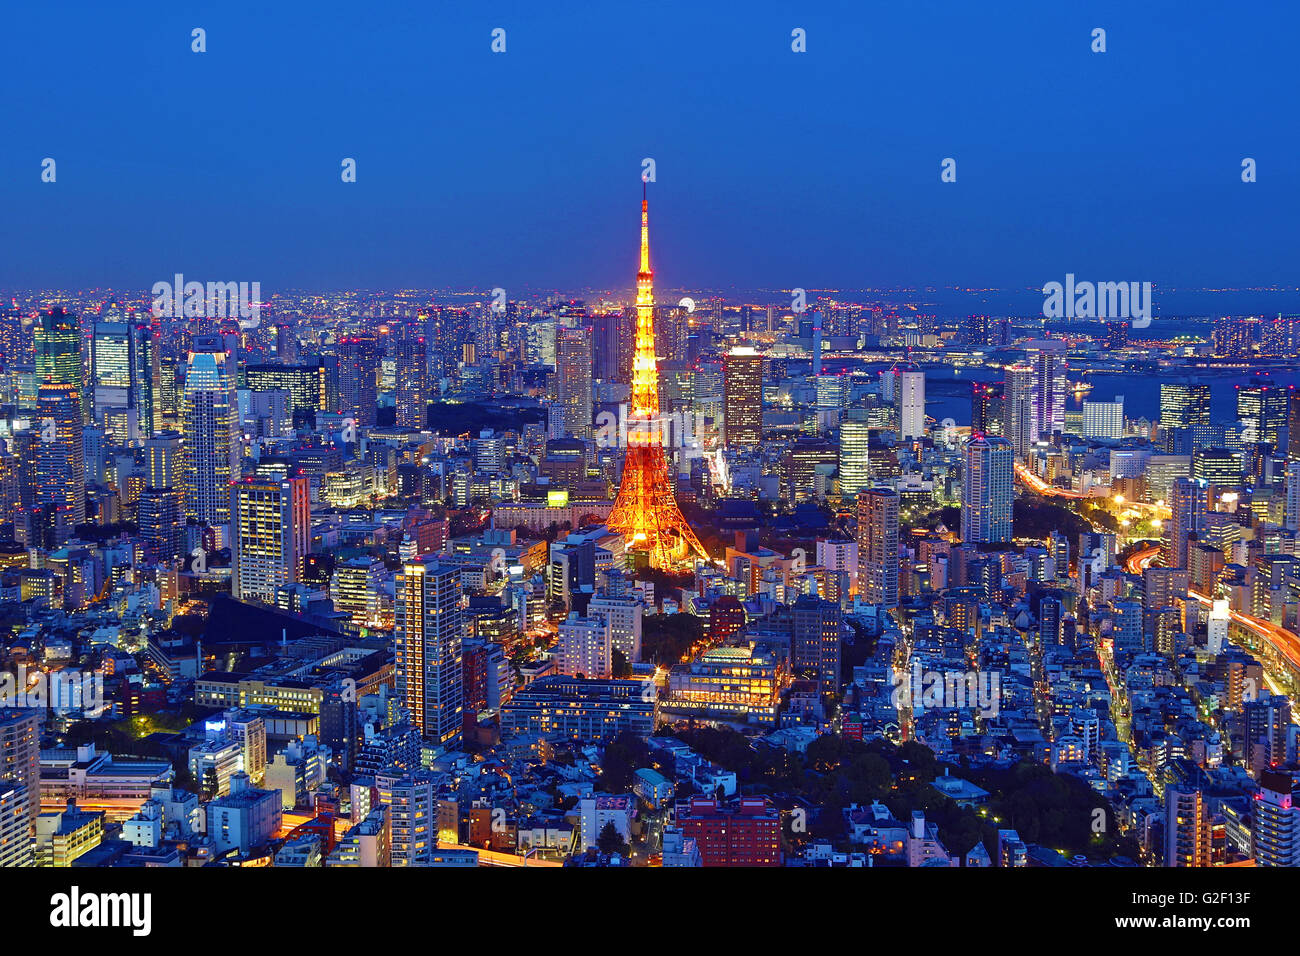 General city skyline night view with the Tokyo Tower of Tokyo, Japan Stock Photo